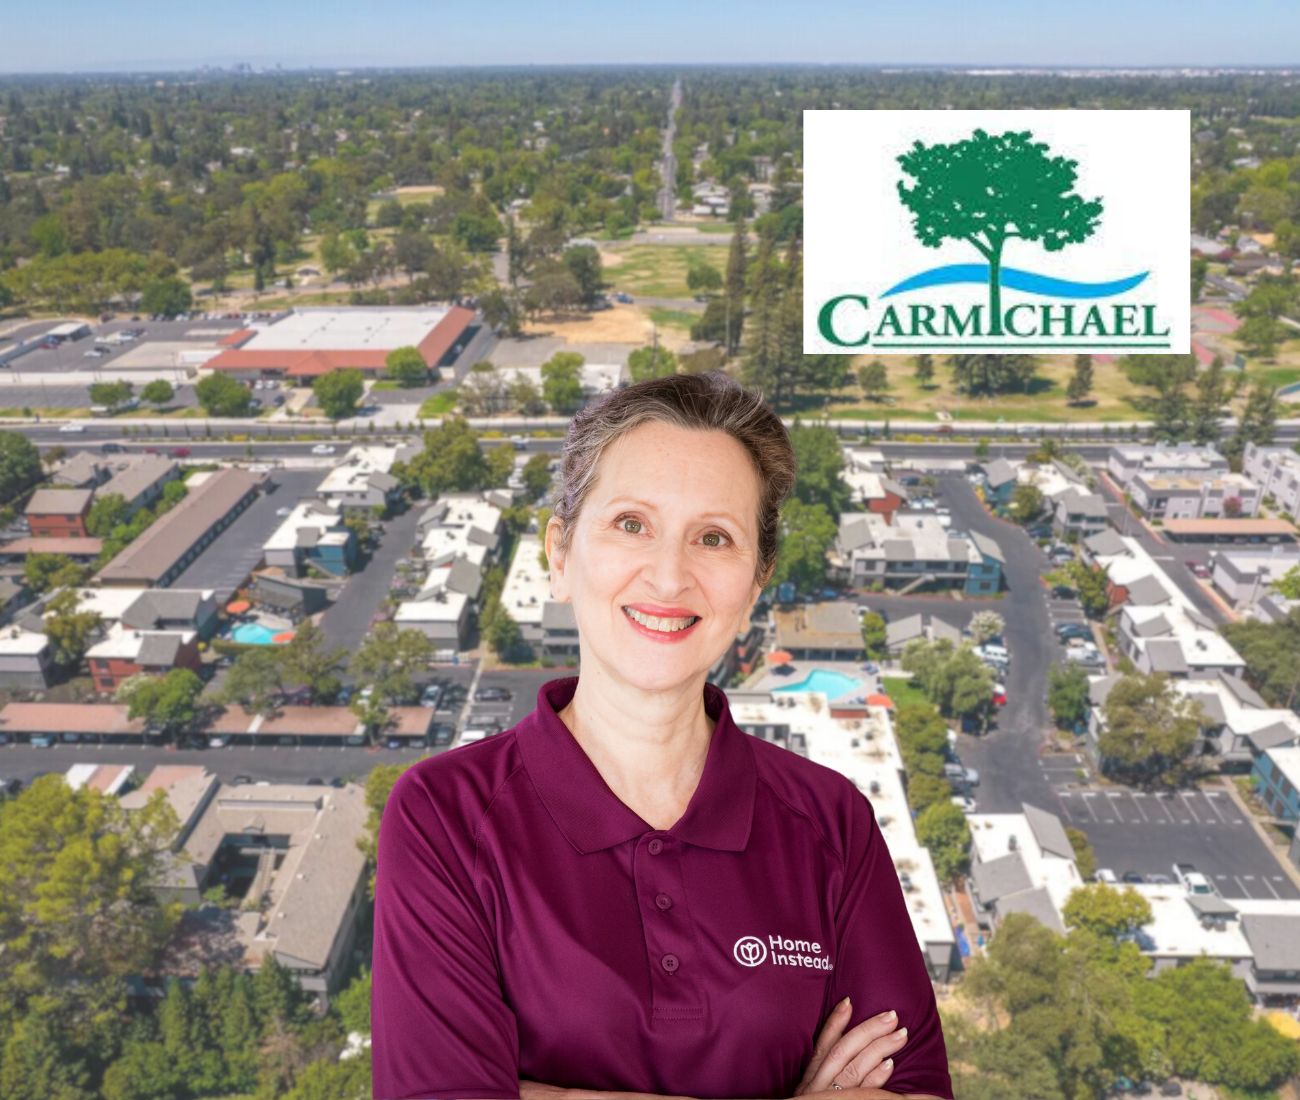 Home Instead caregiver with Carmichael California in the background